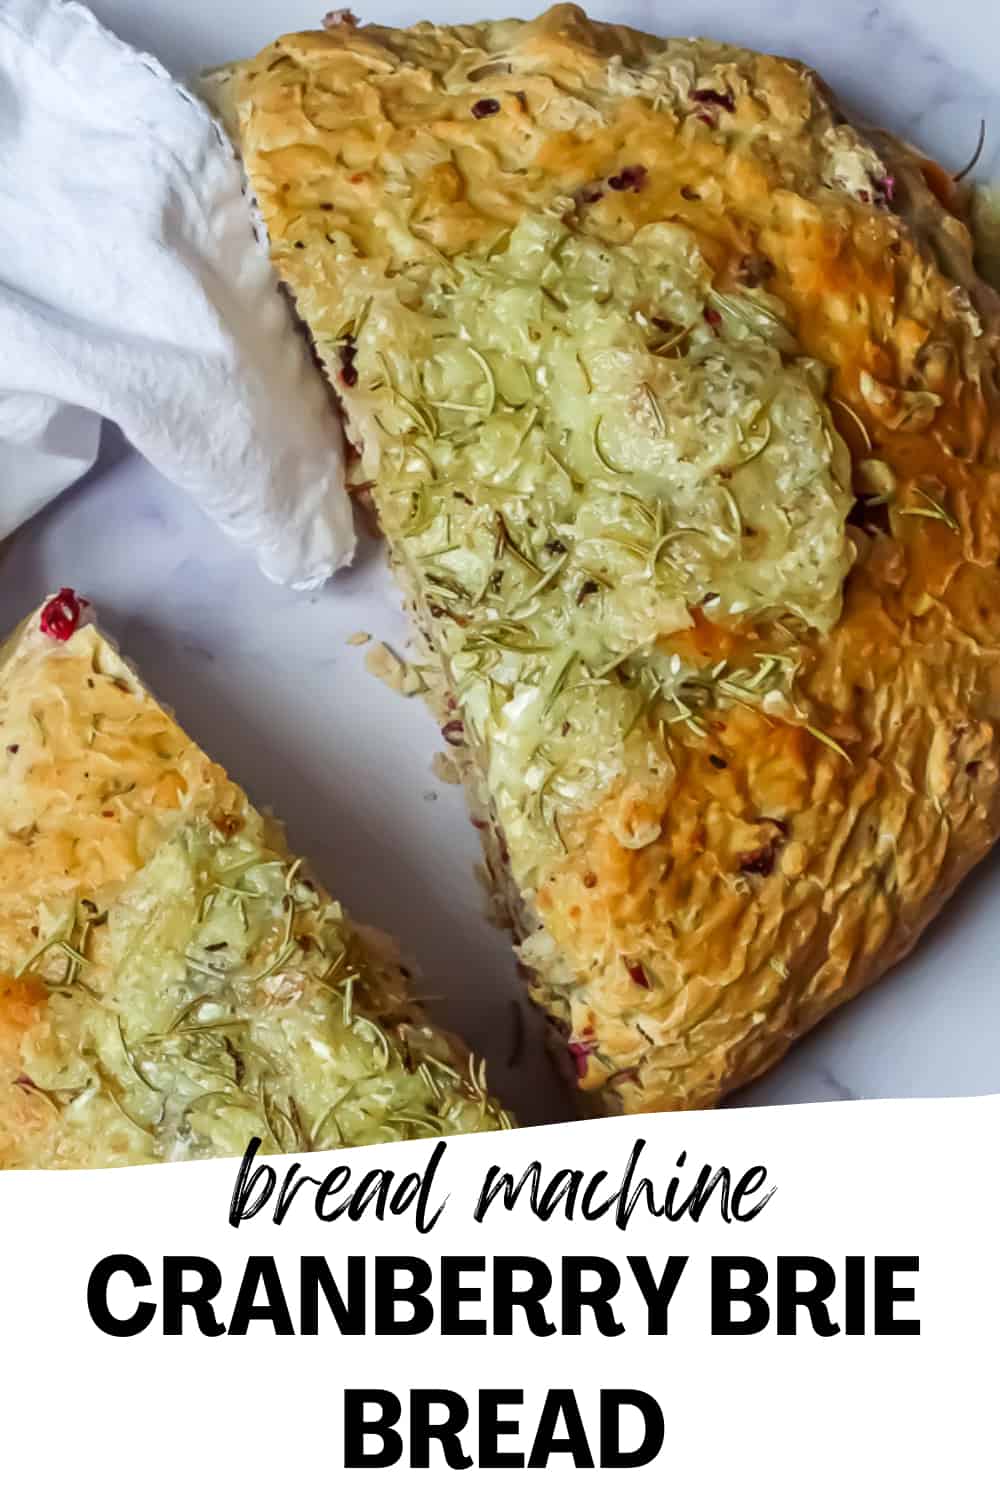 Baked Brie Cranberry Bread